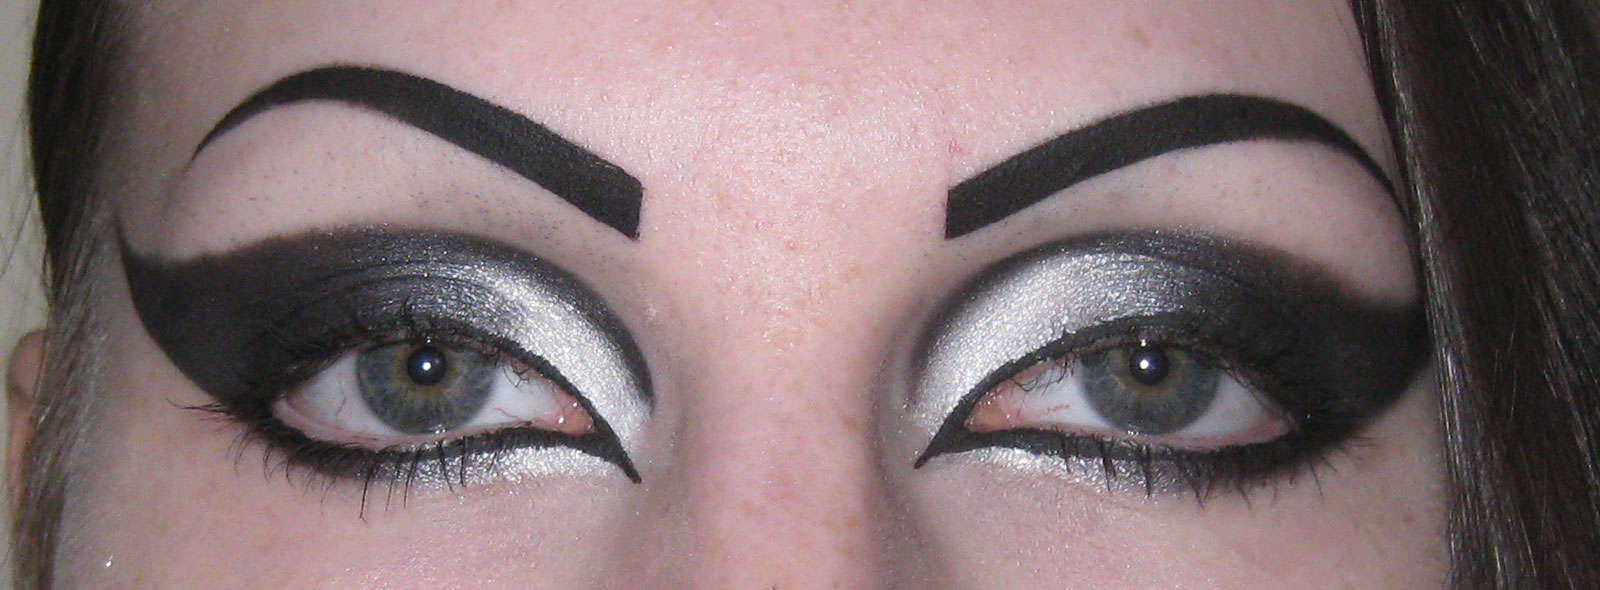 Eye Wing Makeup Tutorial Dramatic Gothic White To Black Extended Winged Cat Eye Makeup